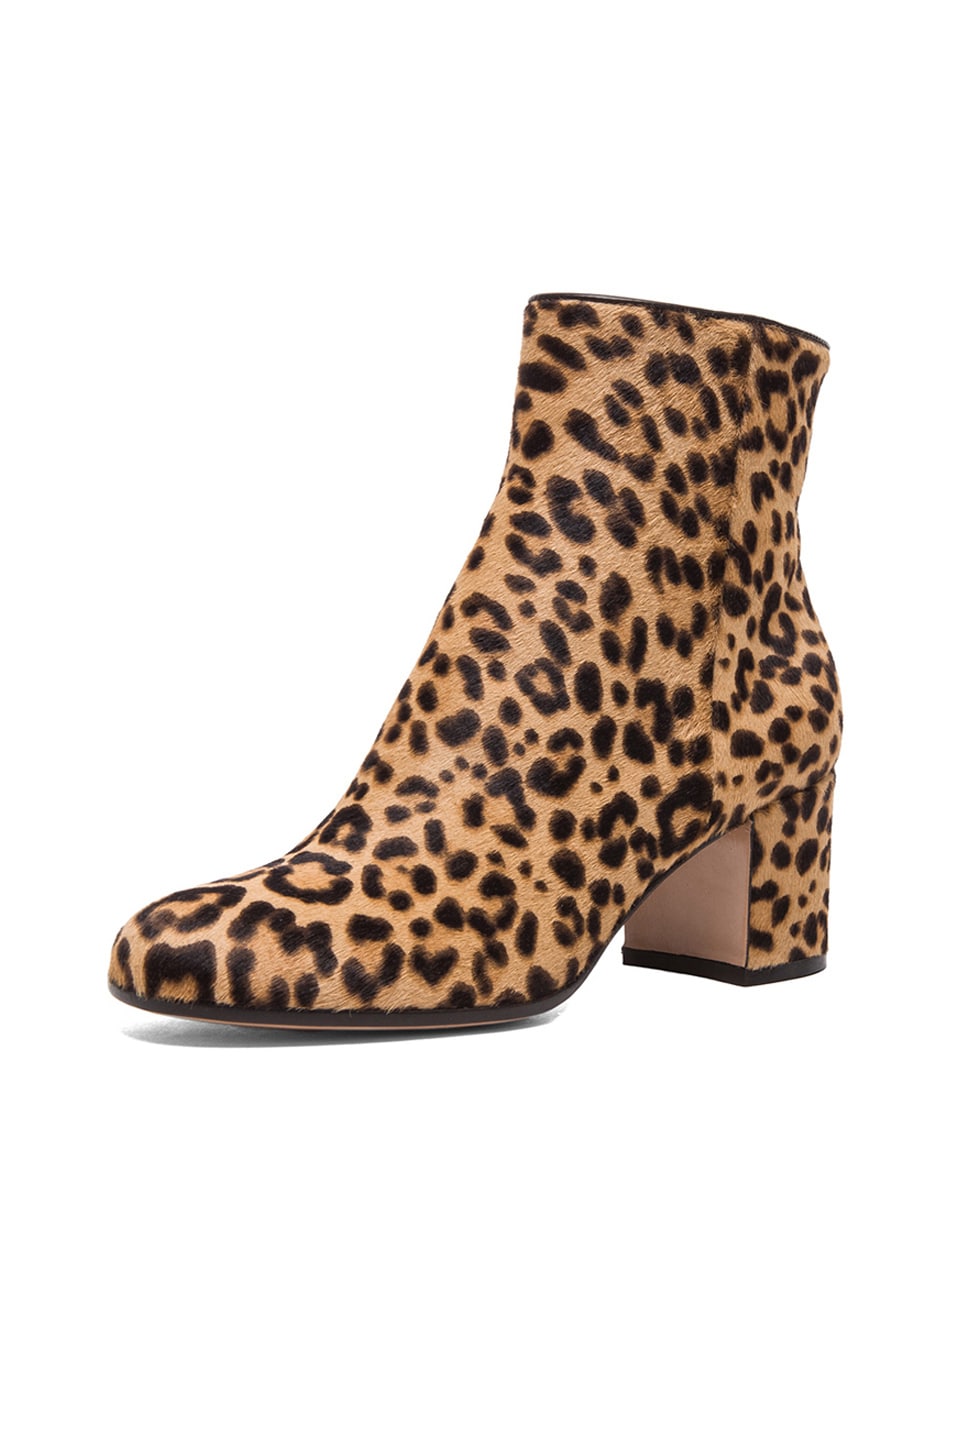 Gianvito Rossi Pony Hair Boots in Leopard | FWRD